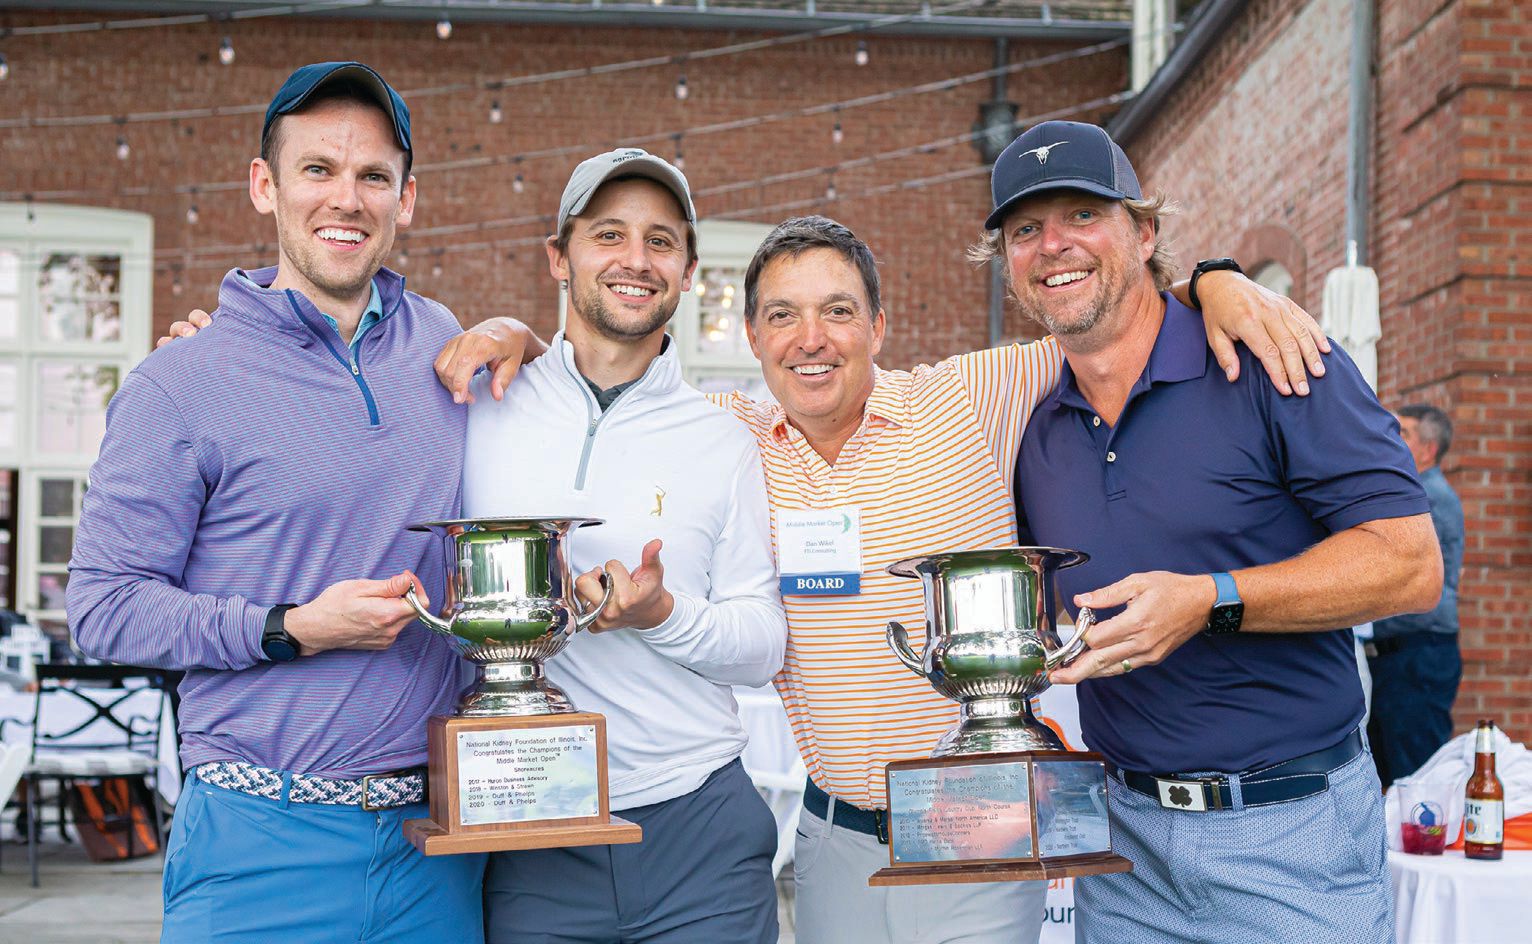 From left: Dan Miles, Sam Domjen, Dan Wikel and Matt Murphy celebrate their victory in the National Kidney Foundation of Illinois’ 2021 Middle Market Open golf tourney. PHOTO BY NANCY WONG